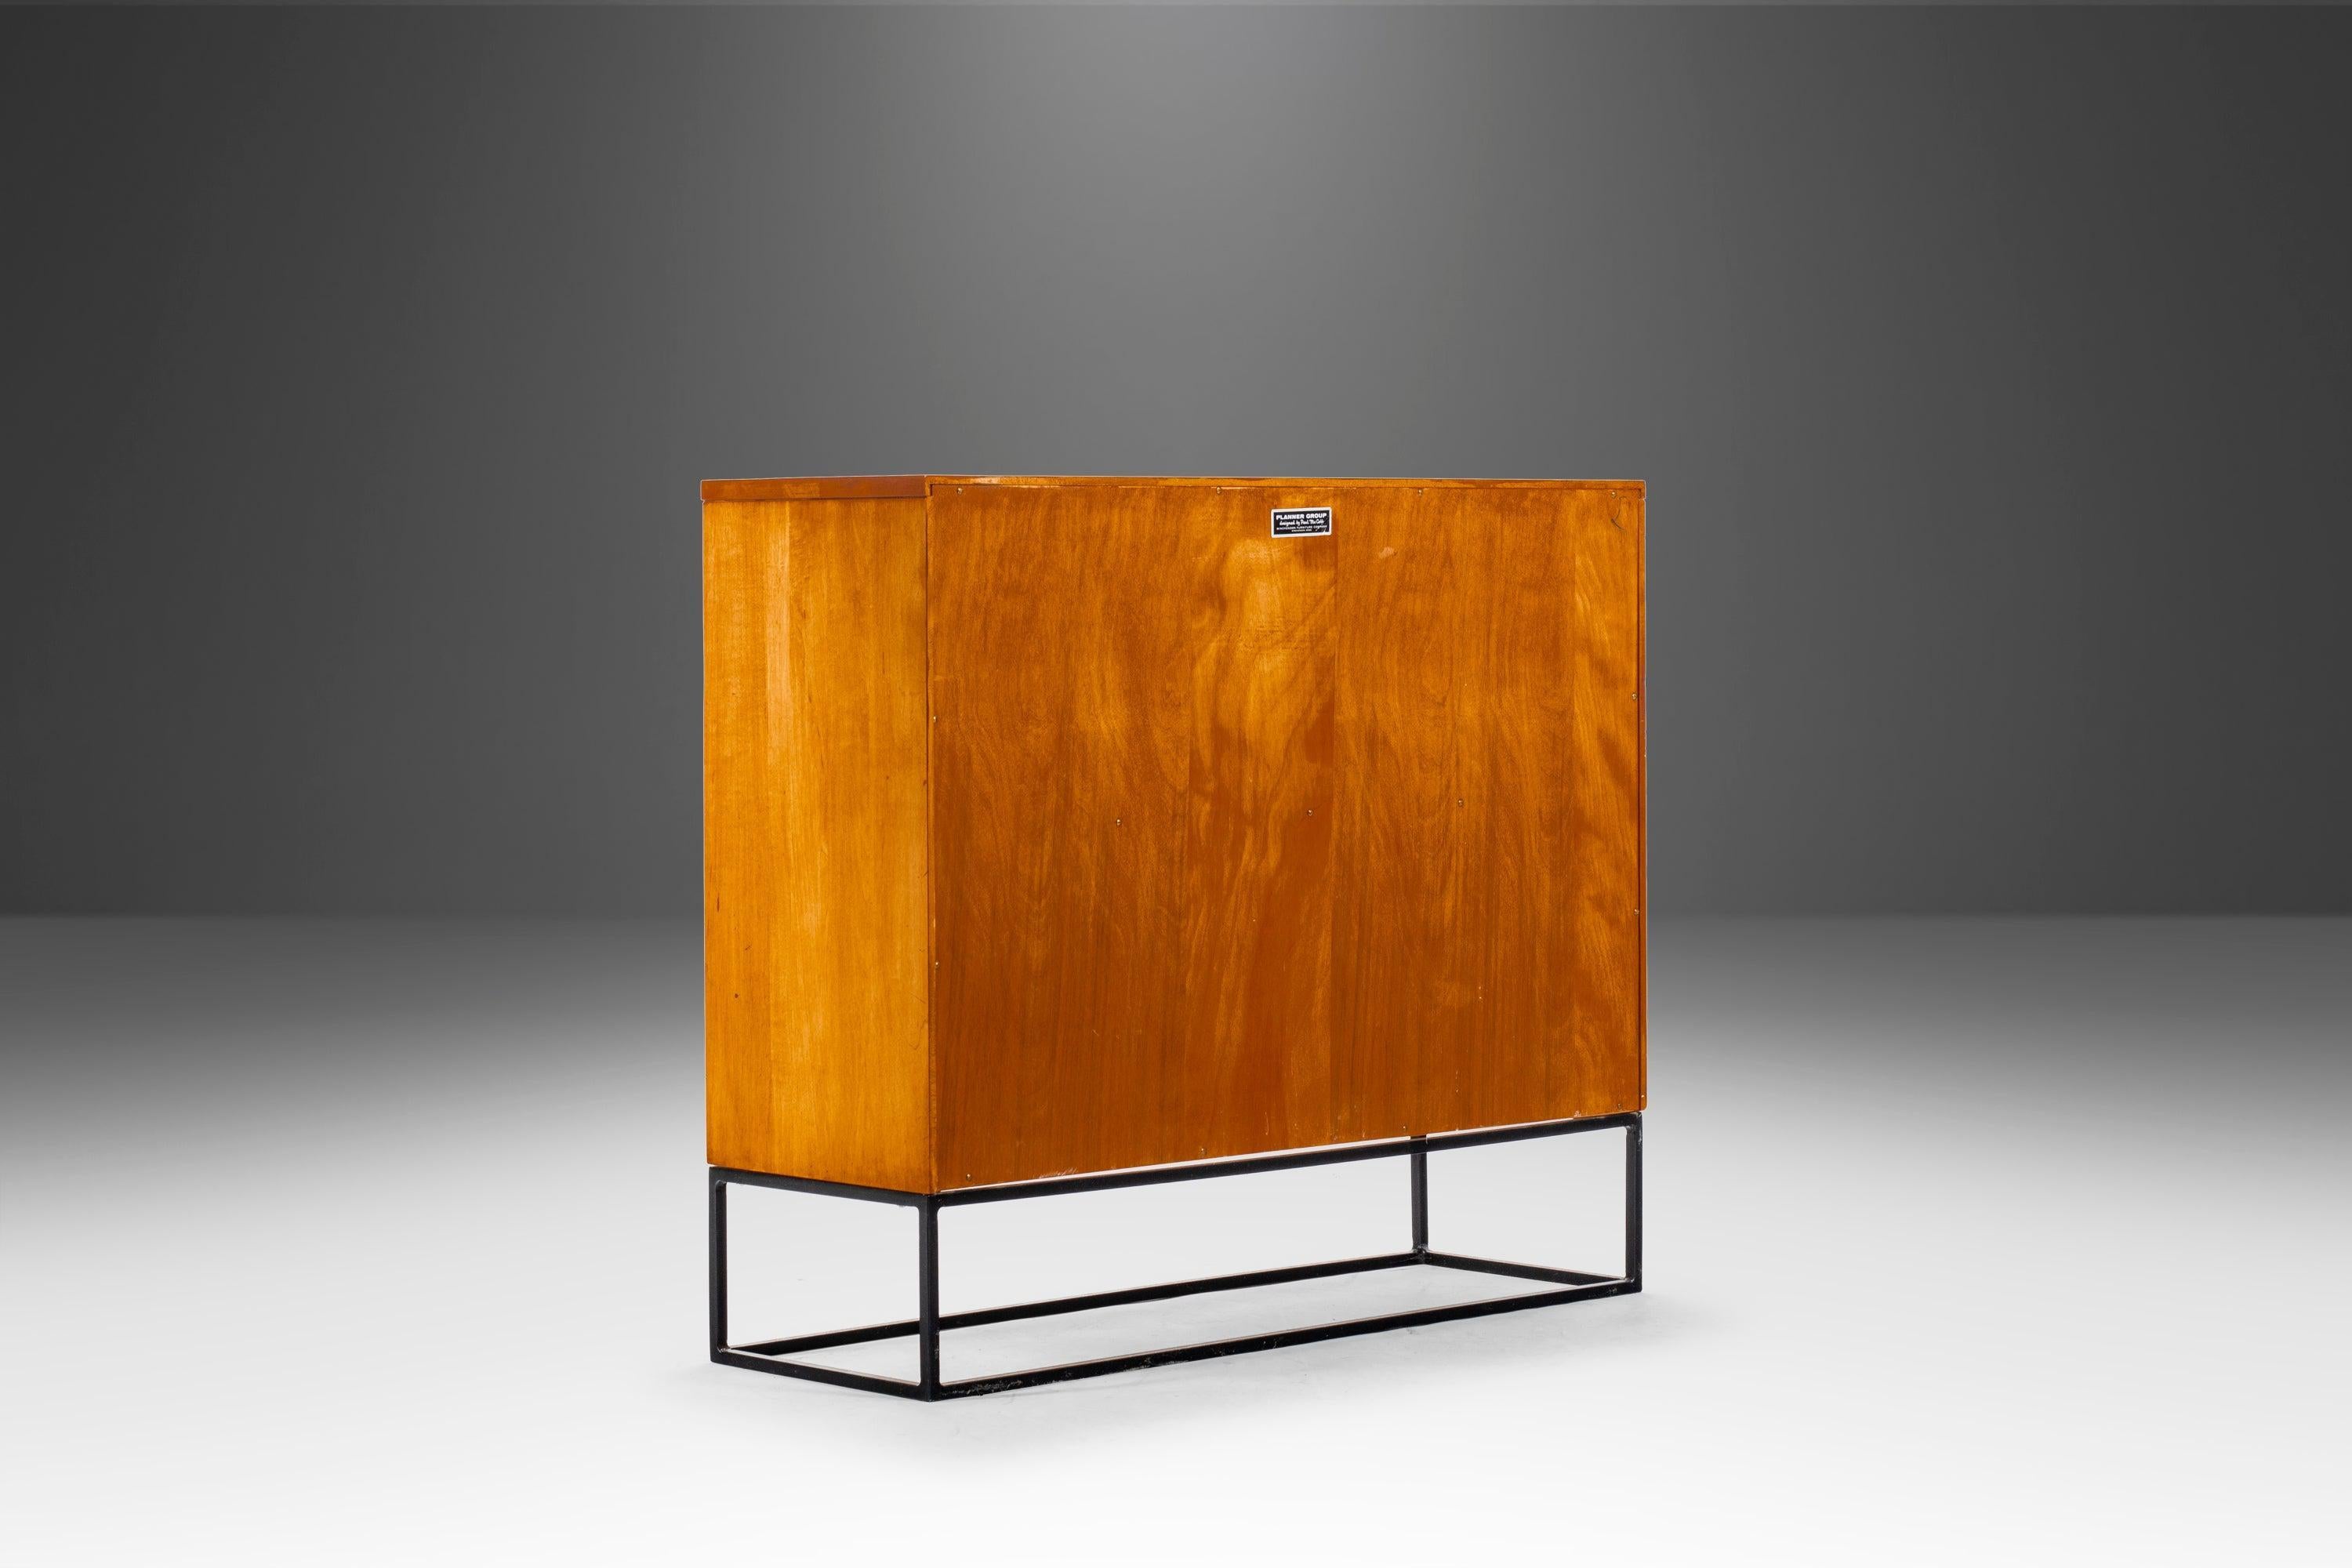 Mid-Century Modern Bookcase / Entry Table by Paul McCobb for Winchendon Planner Group, USA, c. 1960